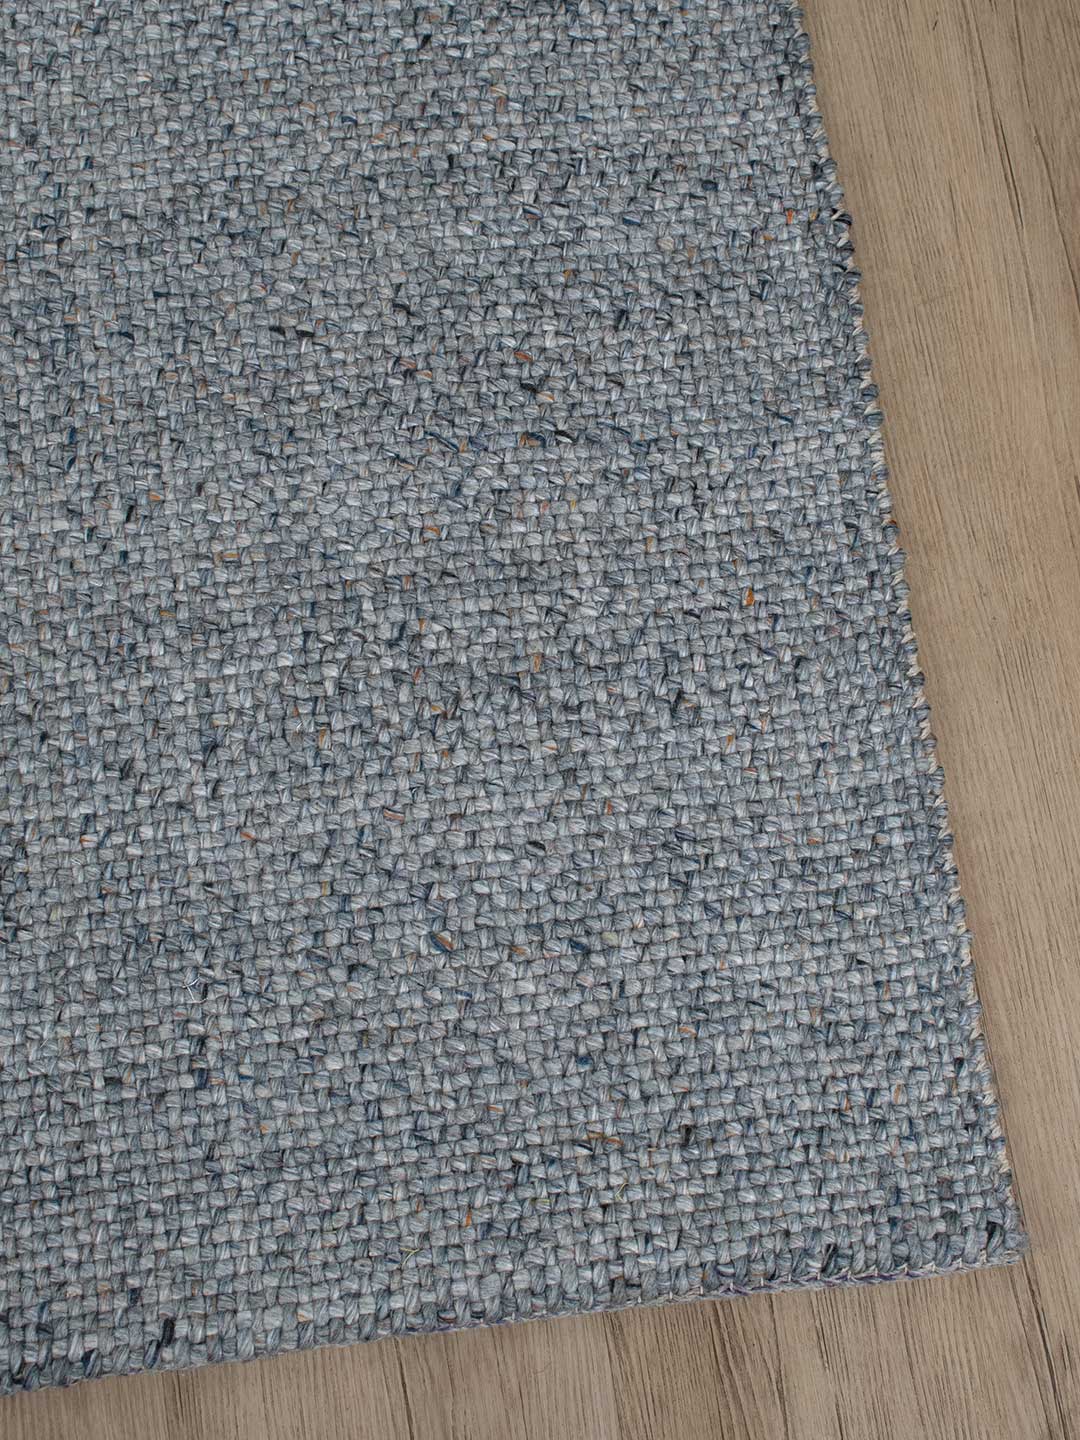 Navajo Mist Rug 20% off from the Rug Collection Stockist Make Your House A Home, Furniture Store Bendigo. Free Australia Wide Delivery